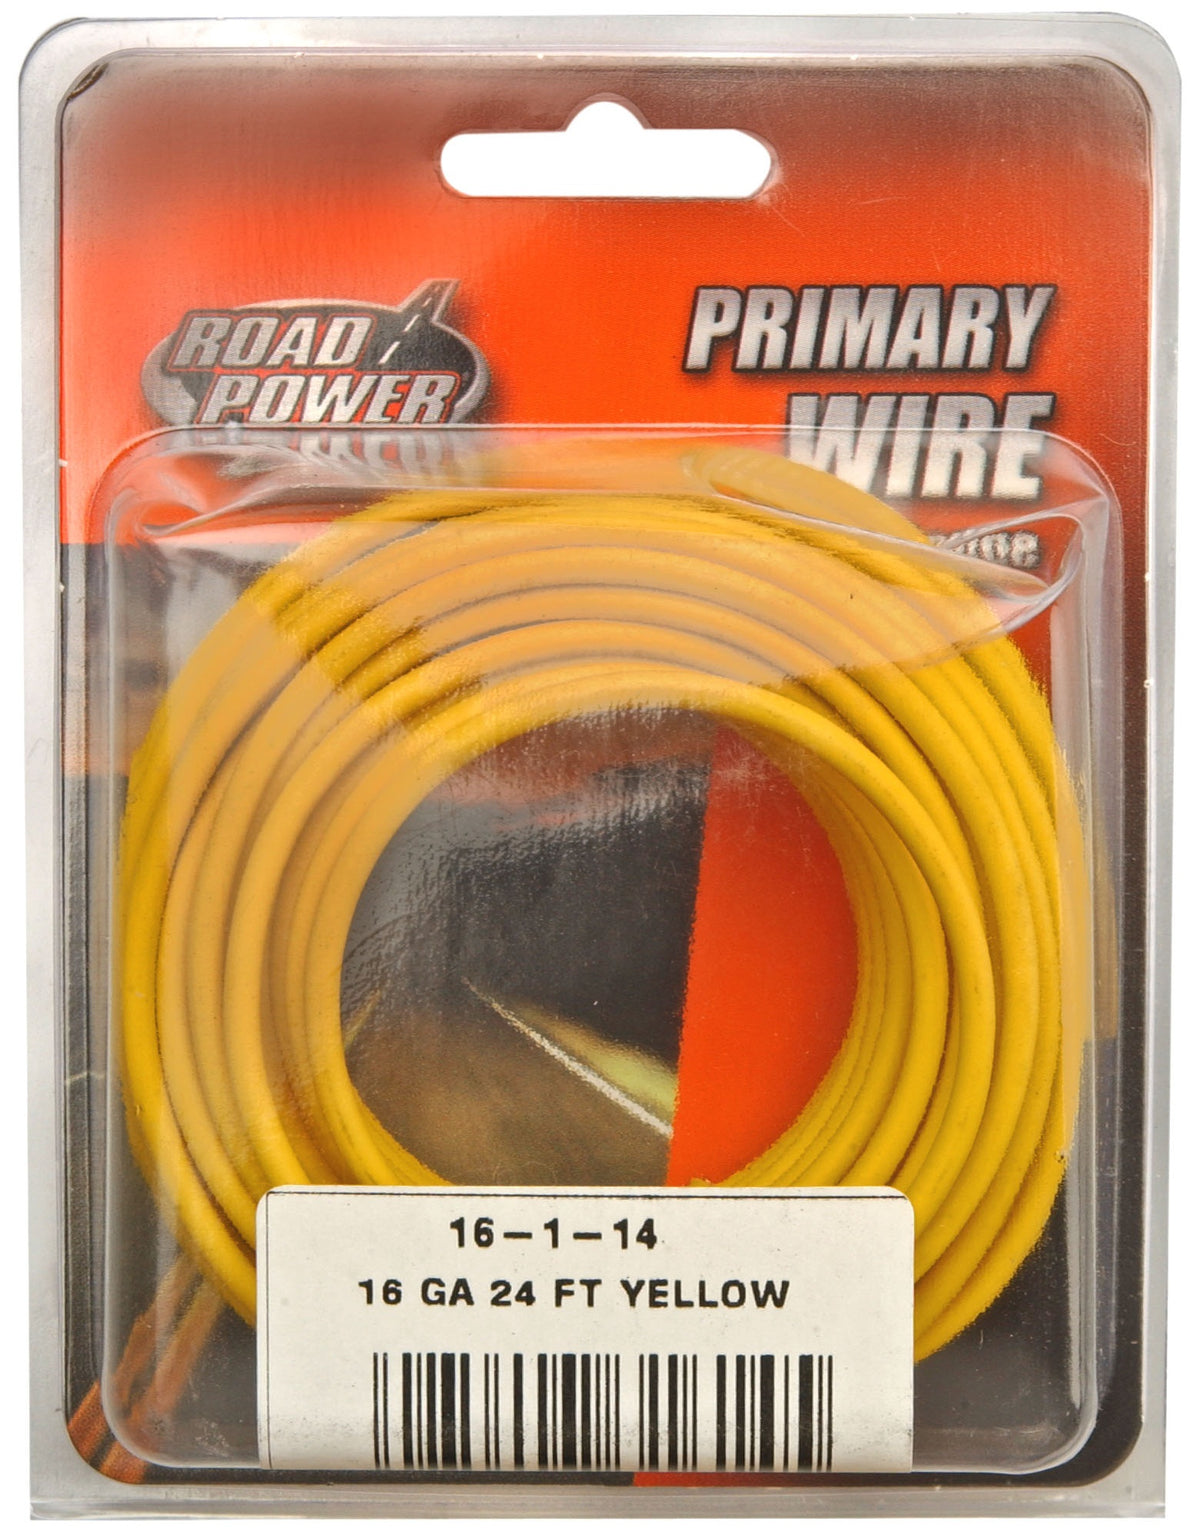 Road Power 55668333 Primary Electrical Wire, 16 Gauge, 24', Yellow